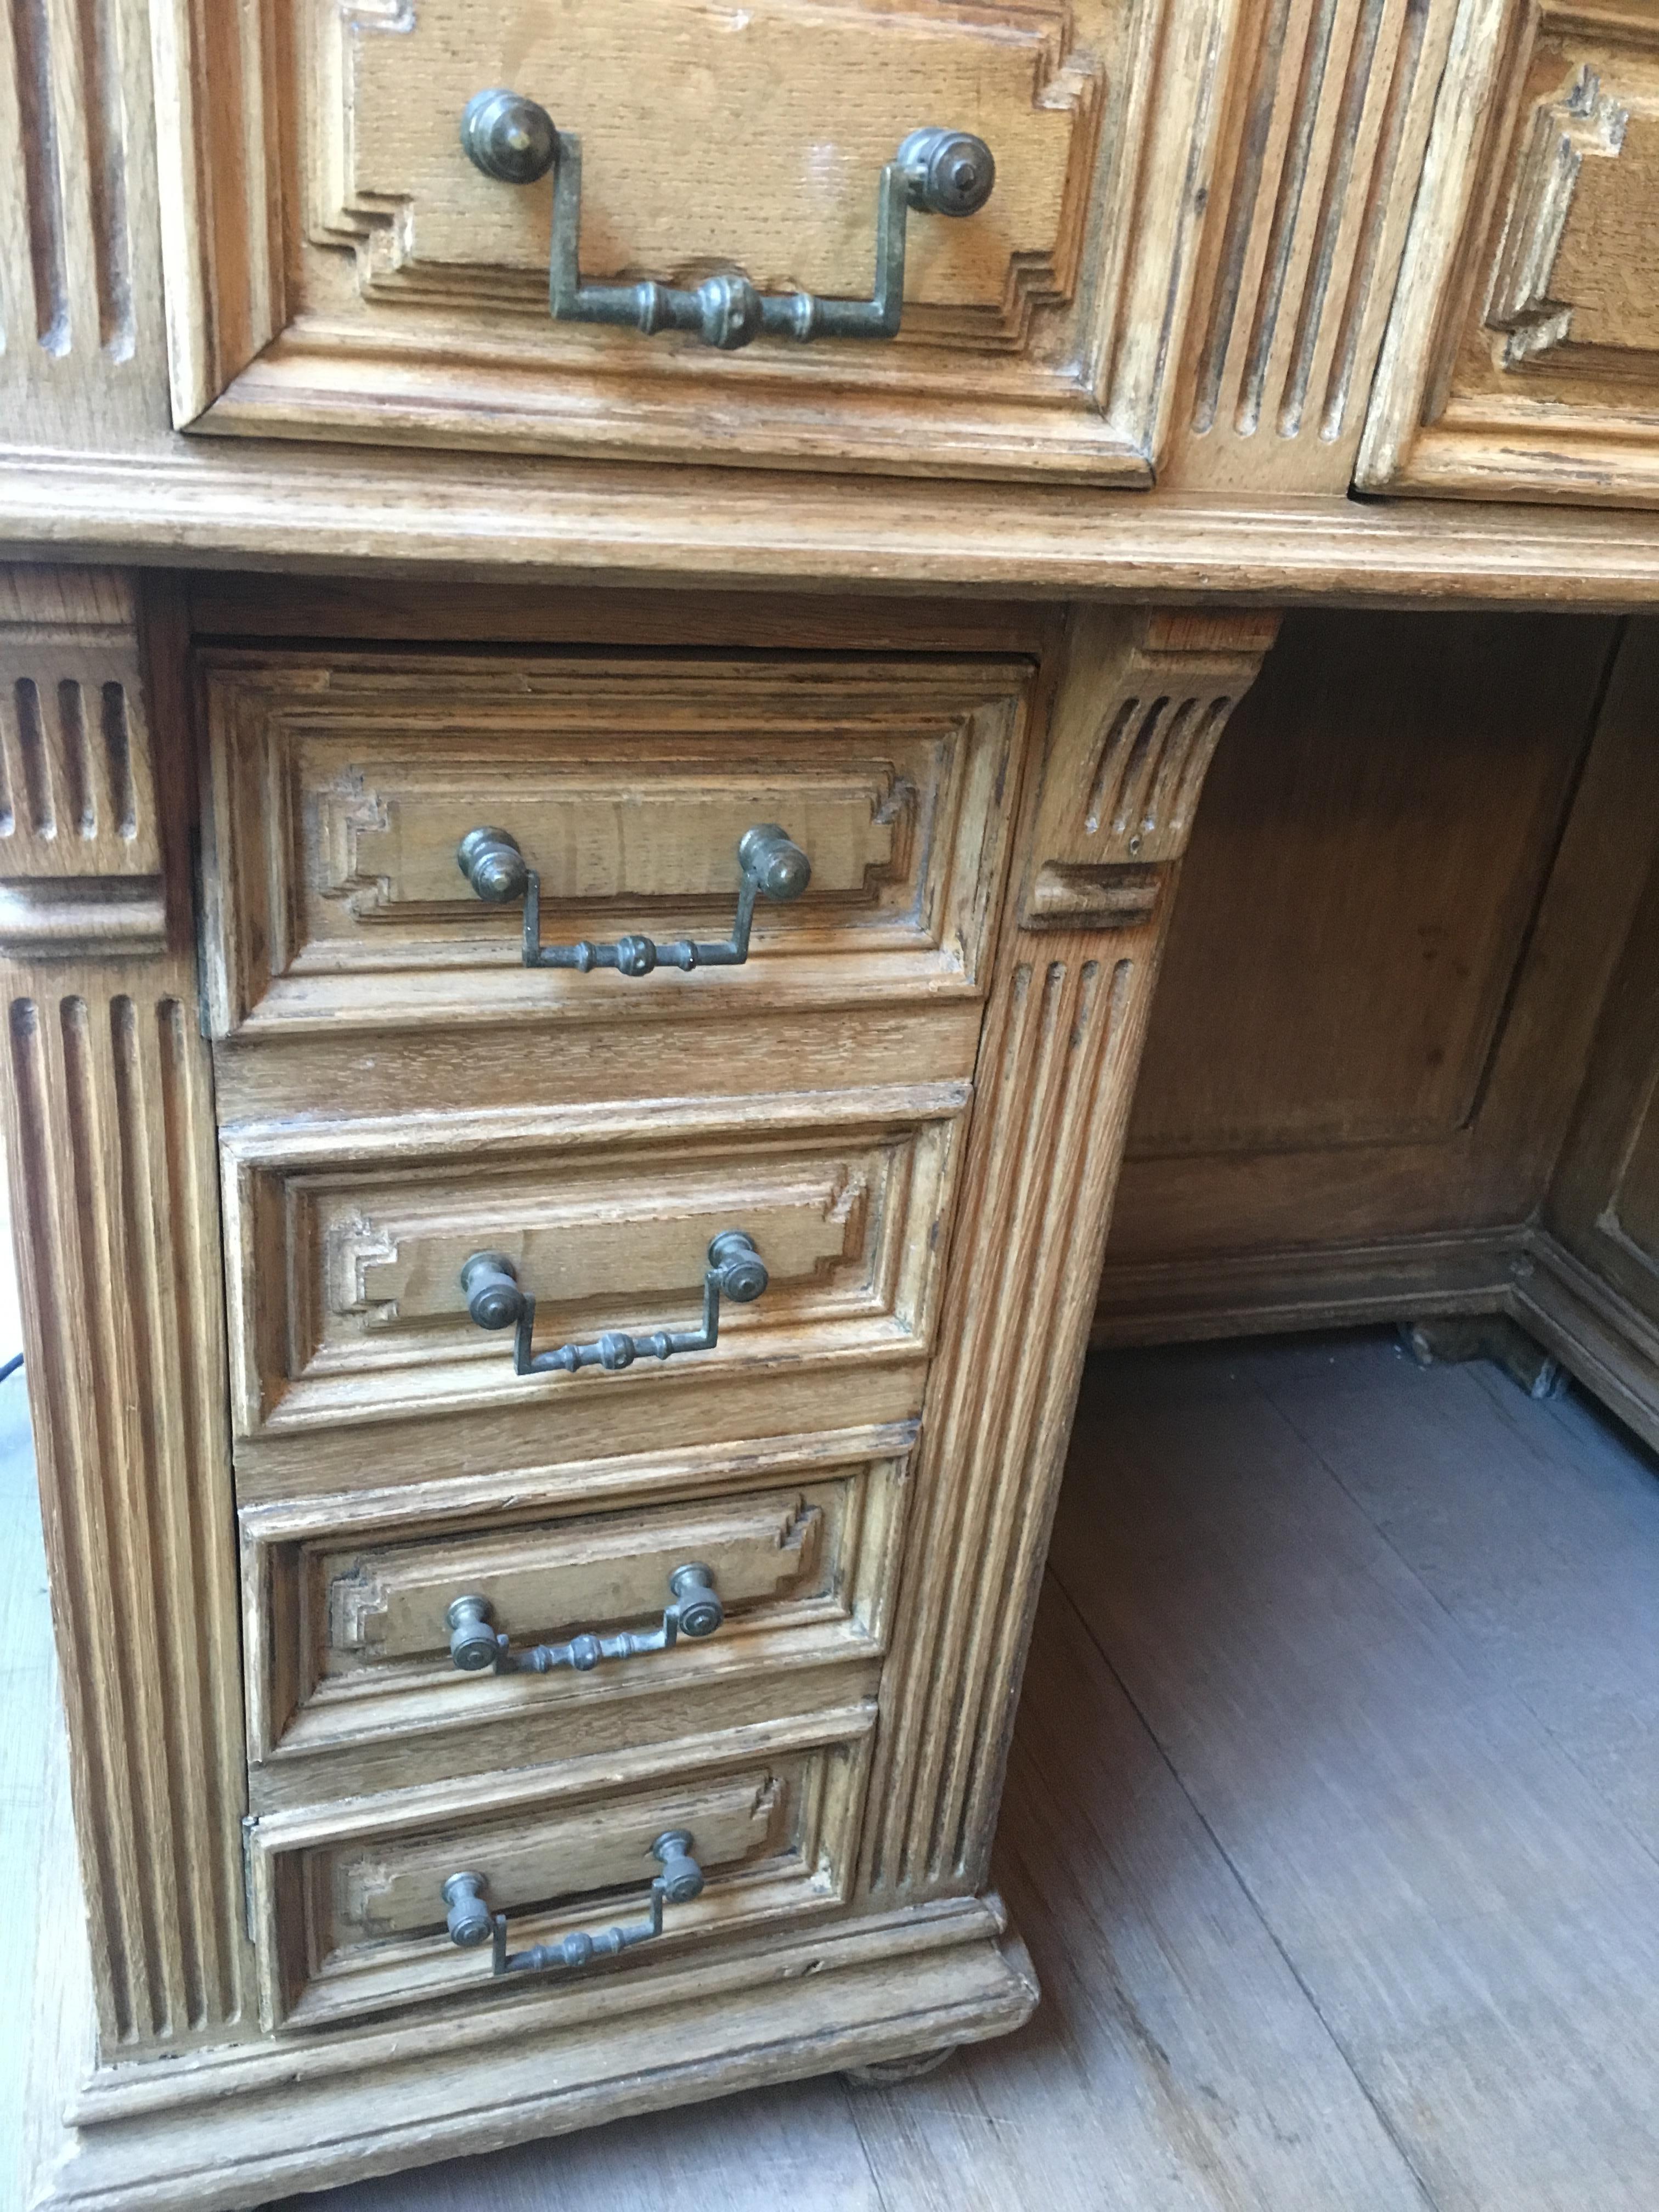 19th Century French Oak Cupboard Sink with Drawers and Carrara Marble Top, 1890s (Spätes 19. Jahrhundert)